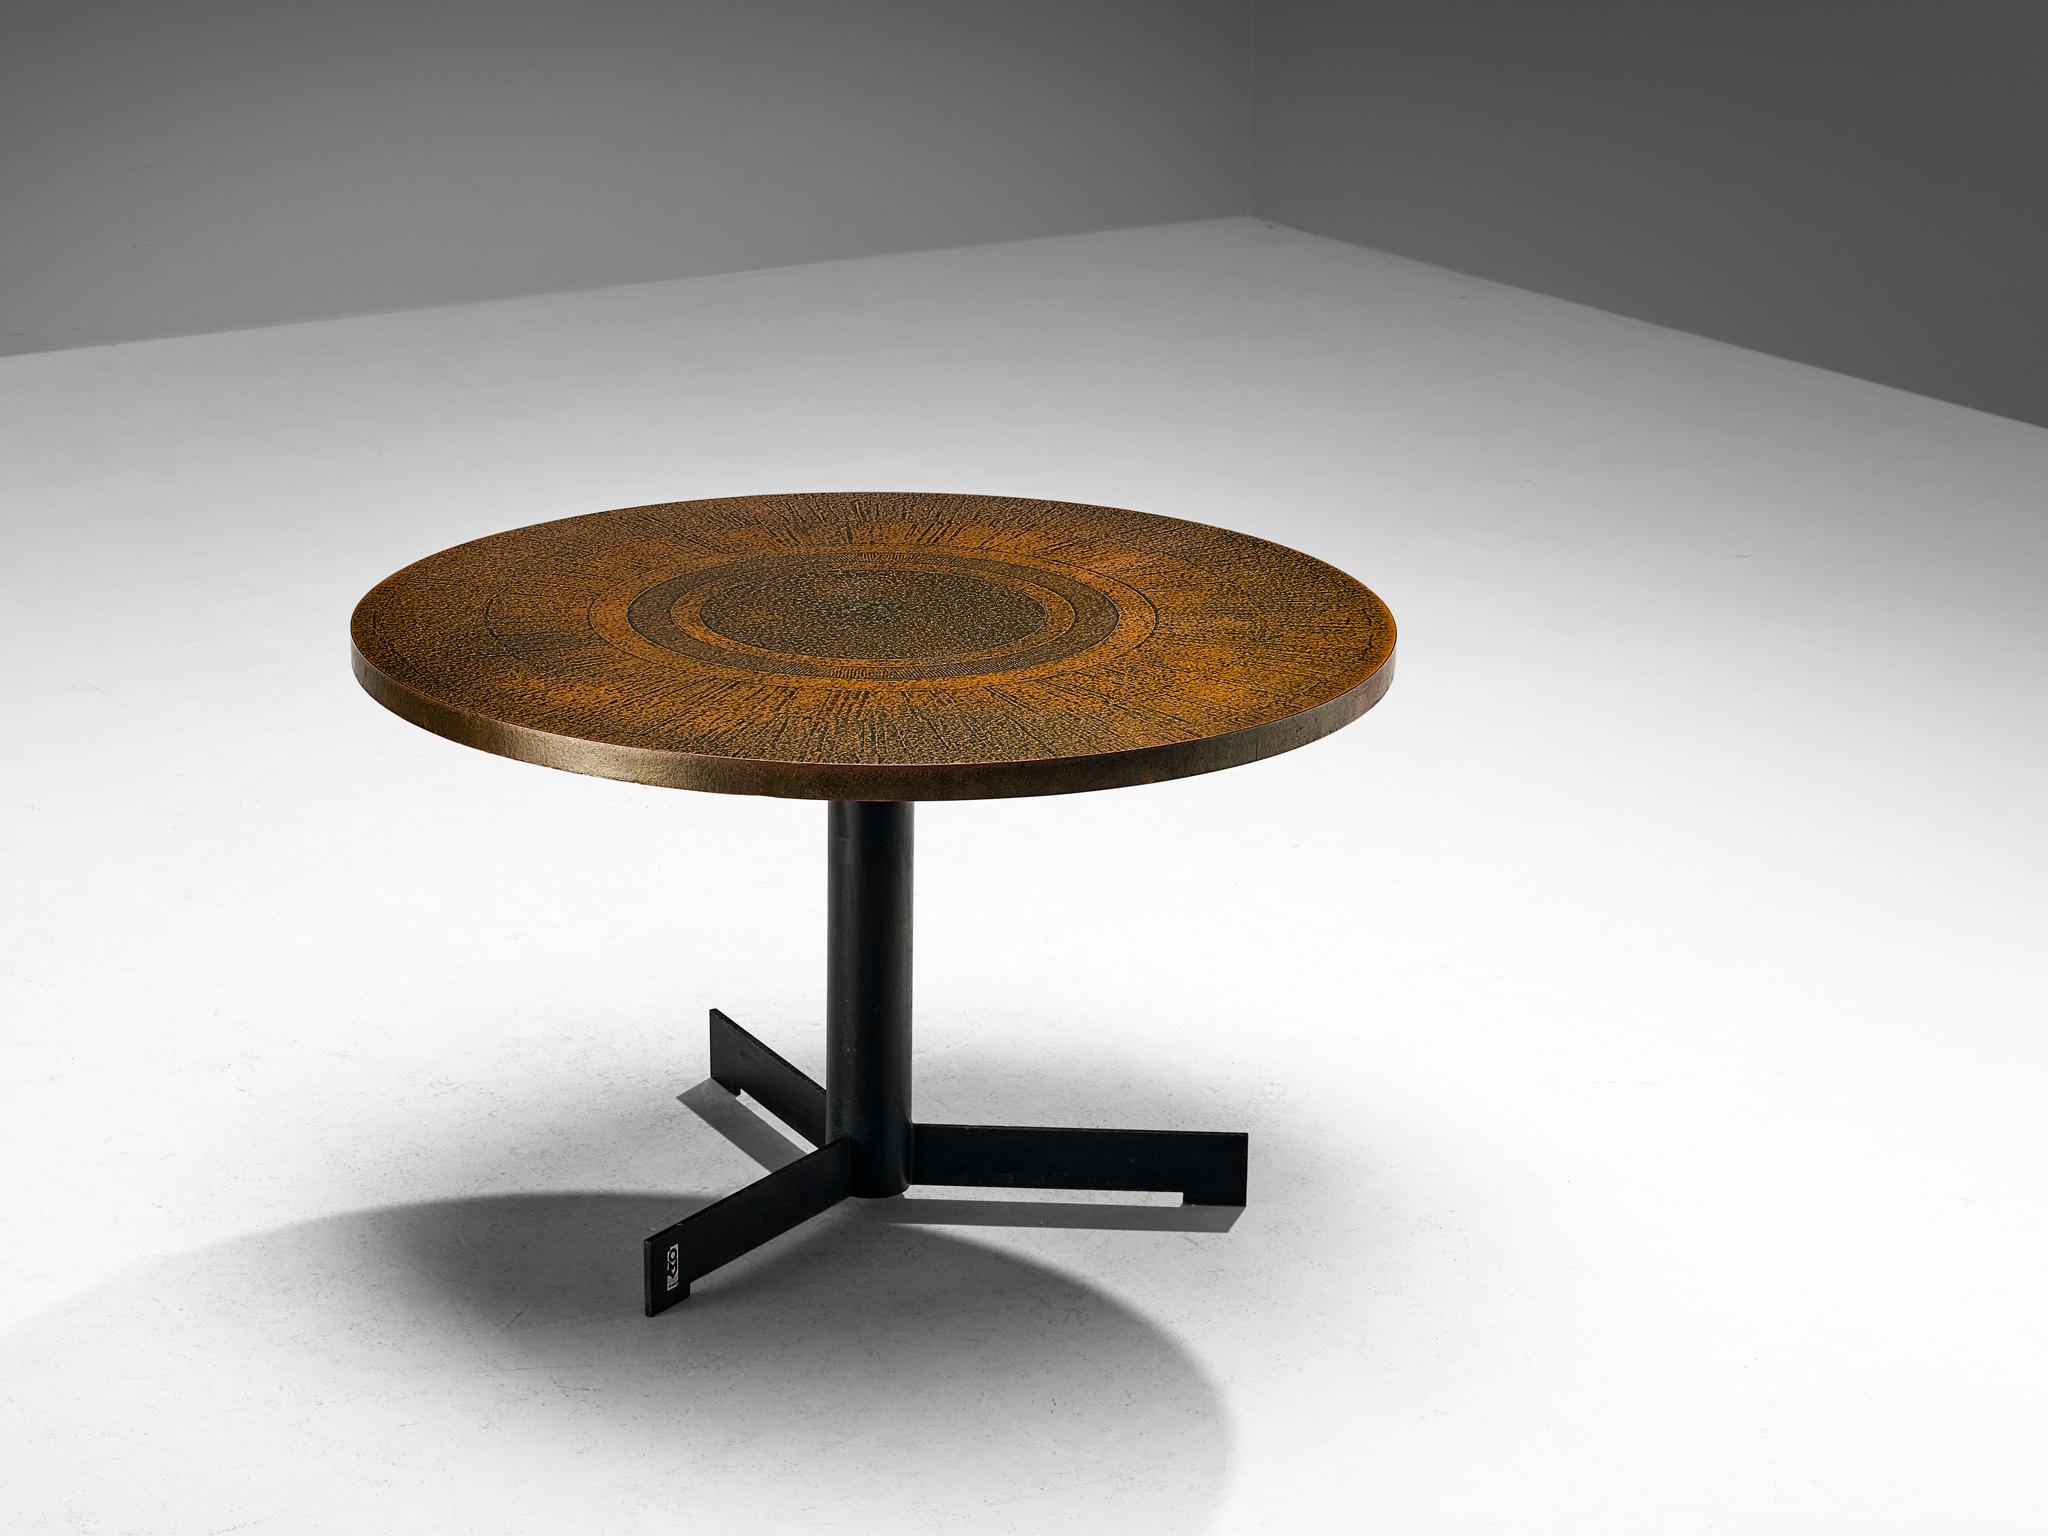 Dining table, formica, coated iron, Europe, 1970s

This circular dining table adheres to a minimalist design approach while skillfully interweaving a captivating interplay of materials and textures. The tabletop presents a striking visual with its